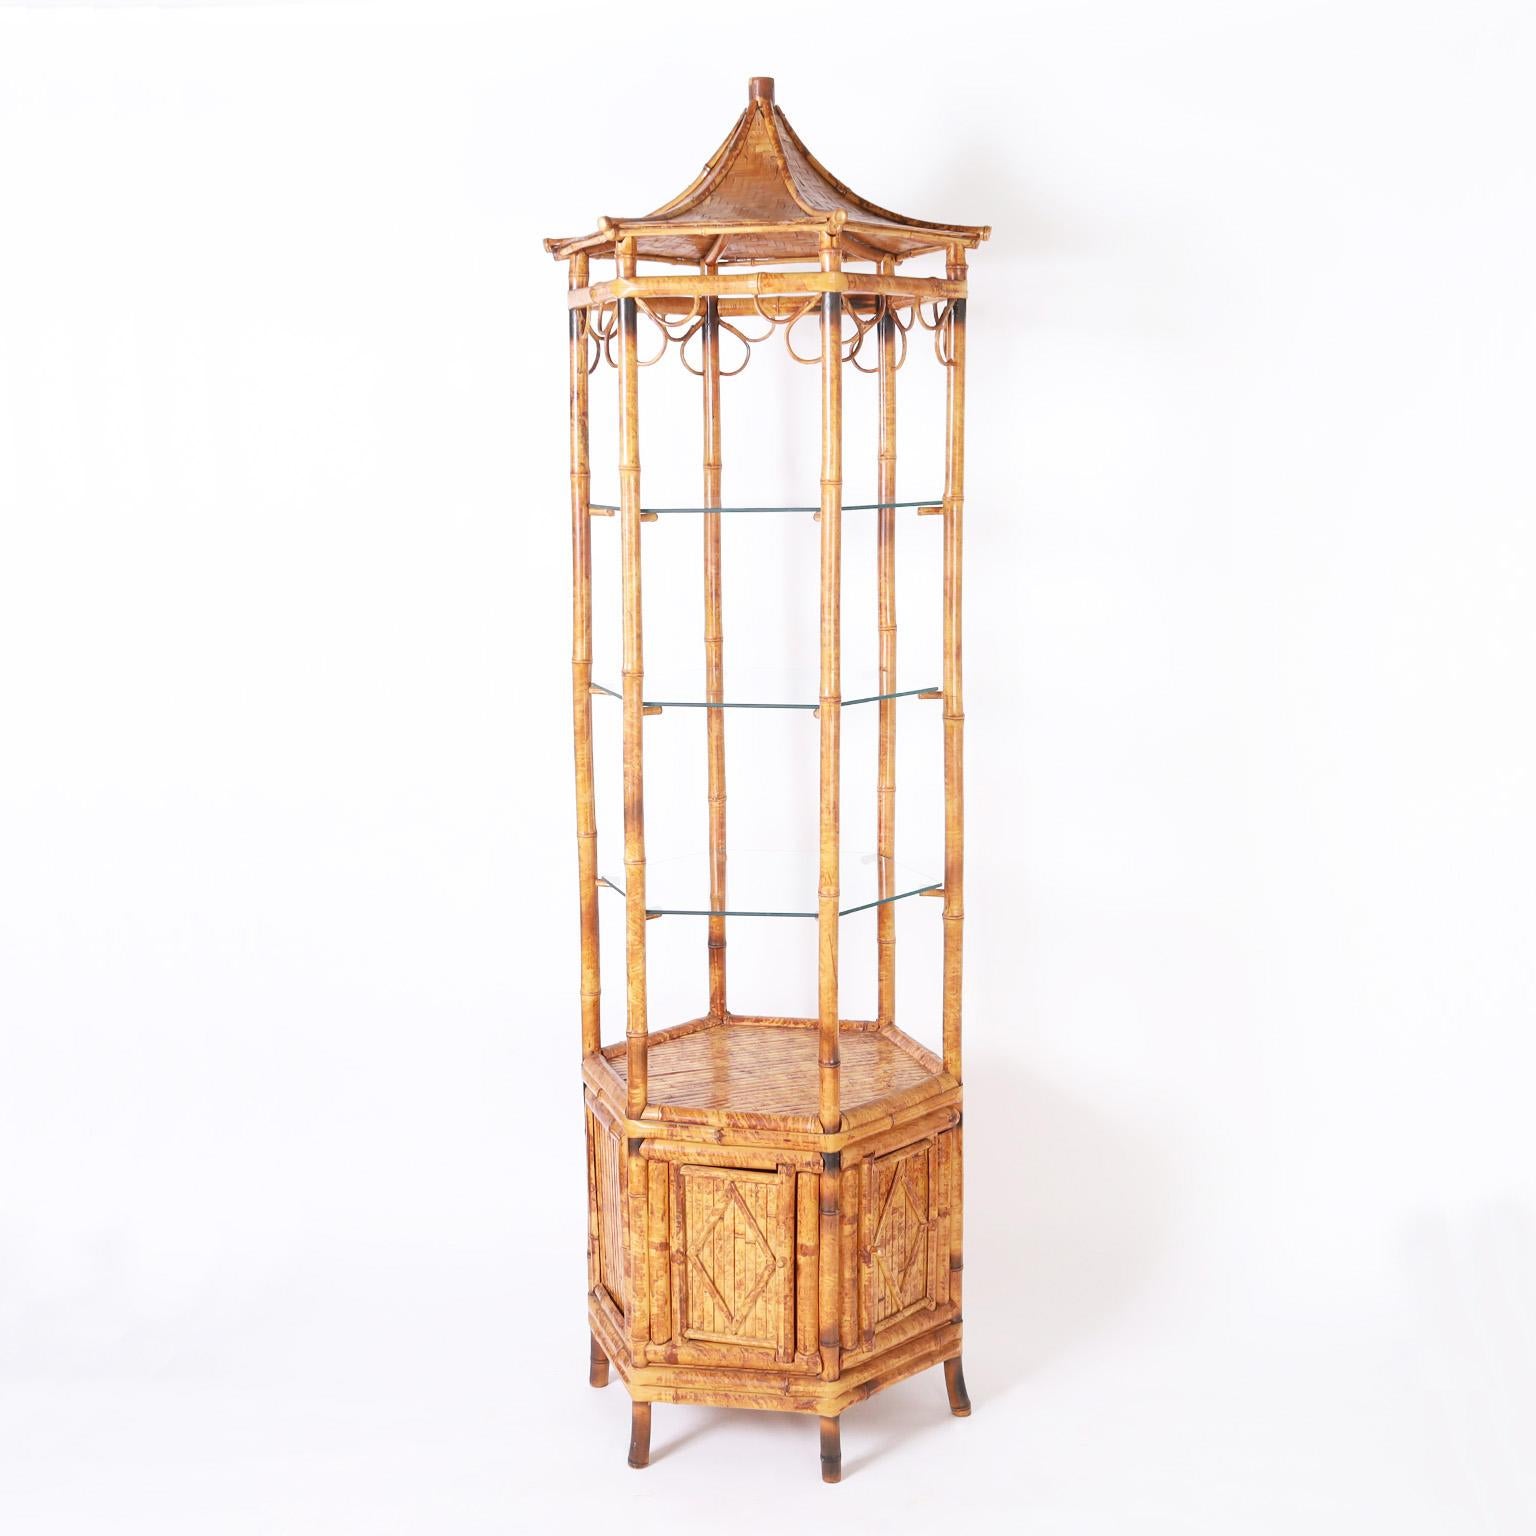 Chic midcentury etagere crafted in bamboo with a woven bamboo pagoda form bonnet over hexagon glass shelves on a bamboo case with a cabinet door and splayed legs.